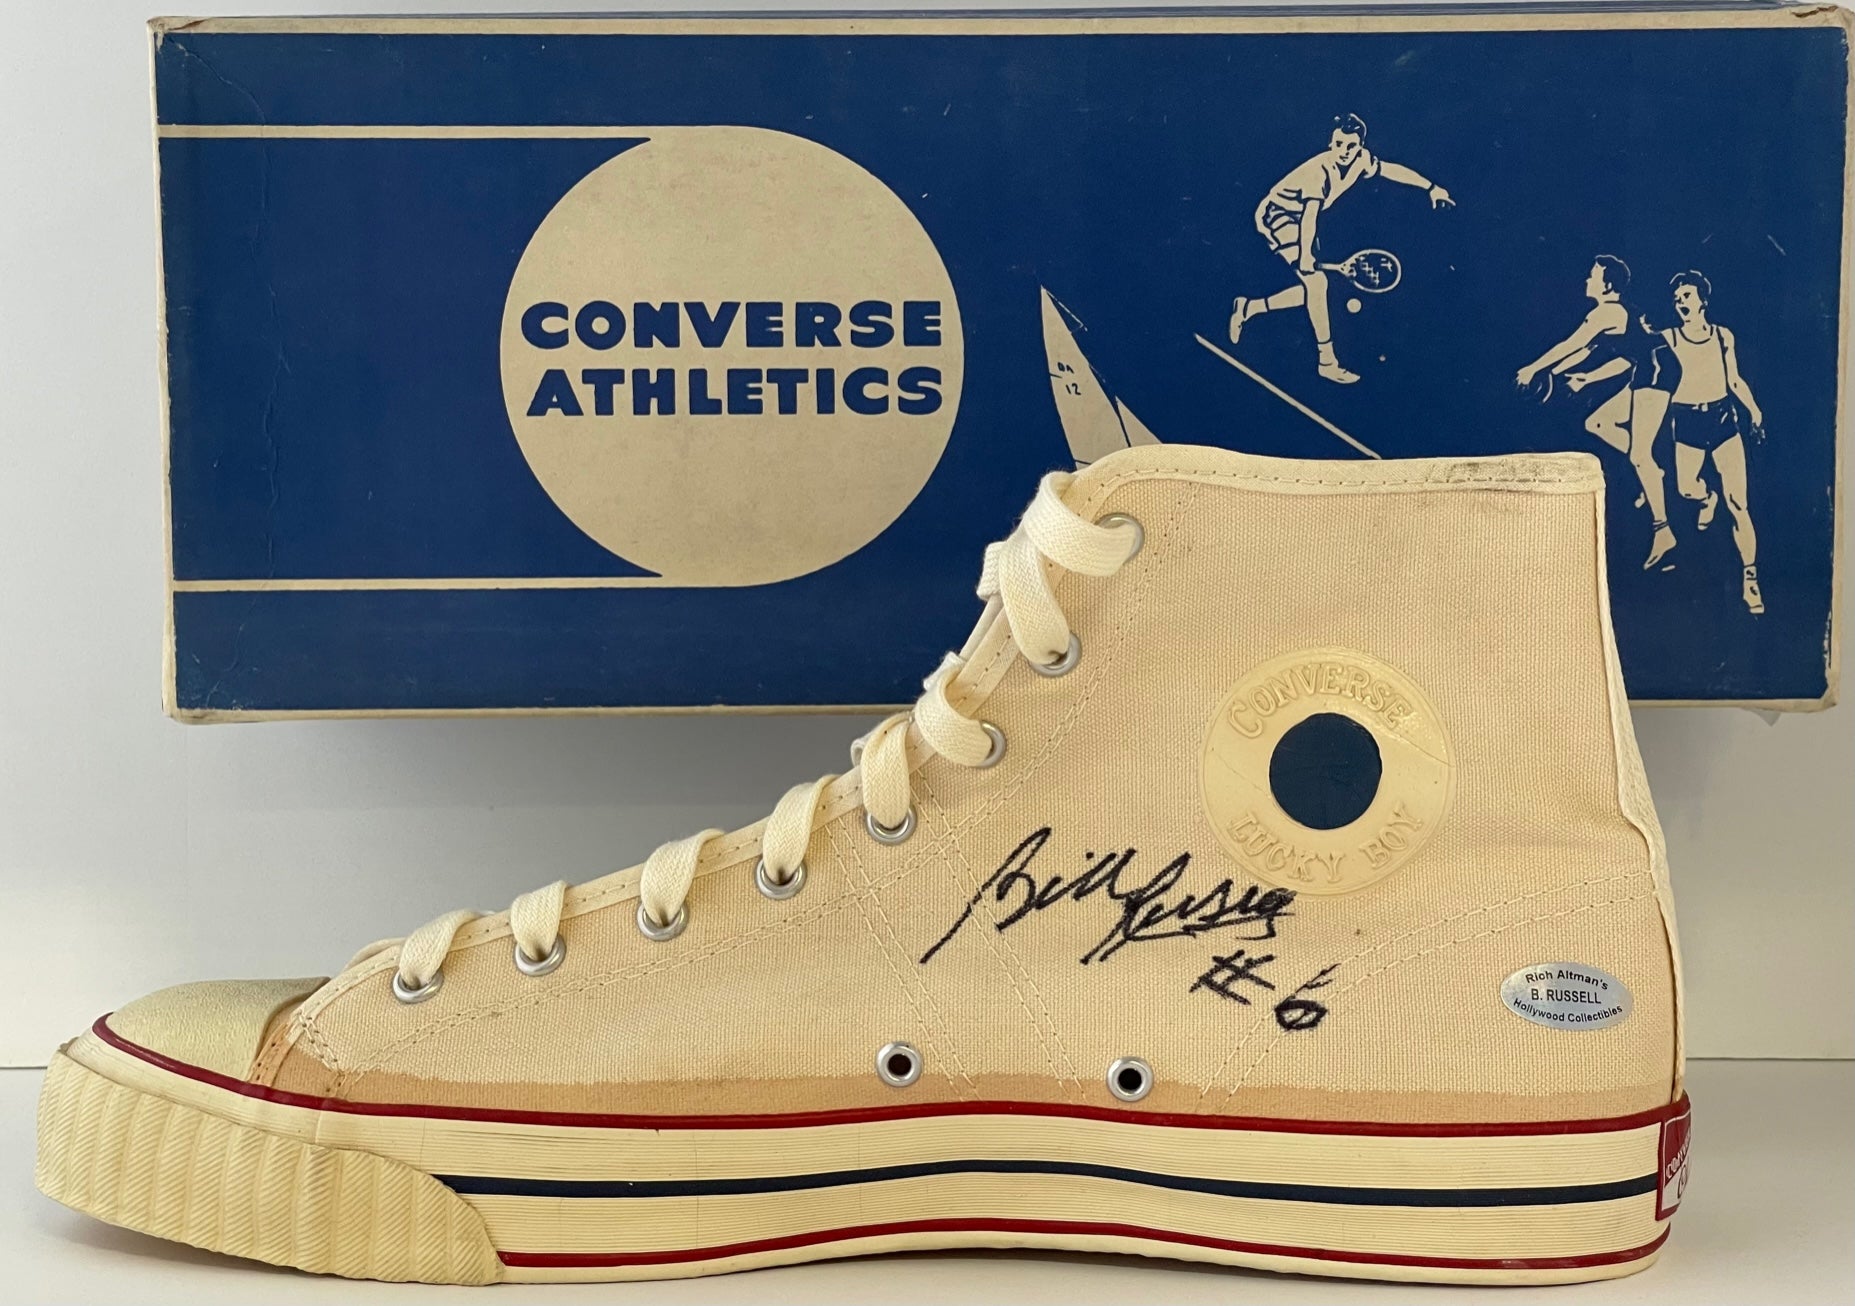 Bill Russell Autographed Athletic Shoe | Hollywood Collectibles